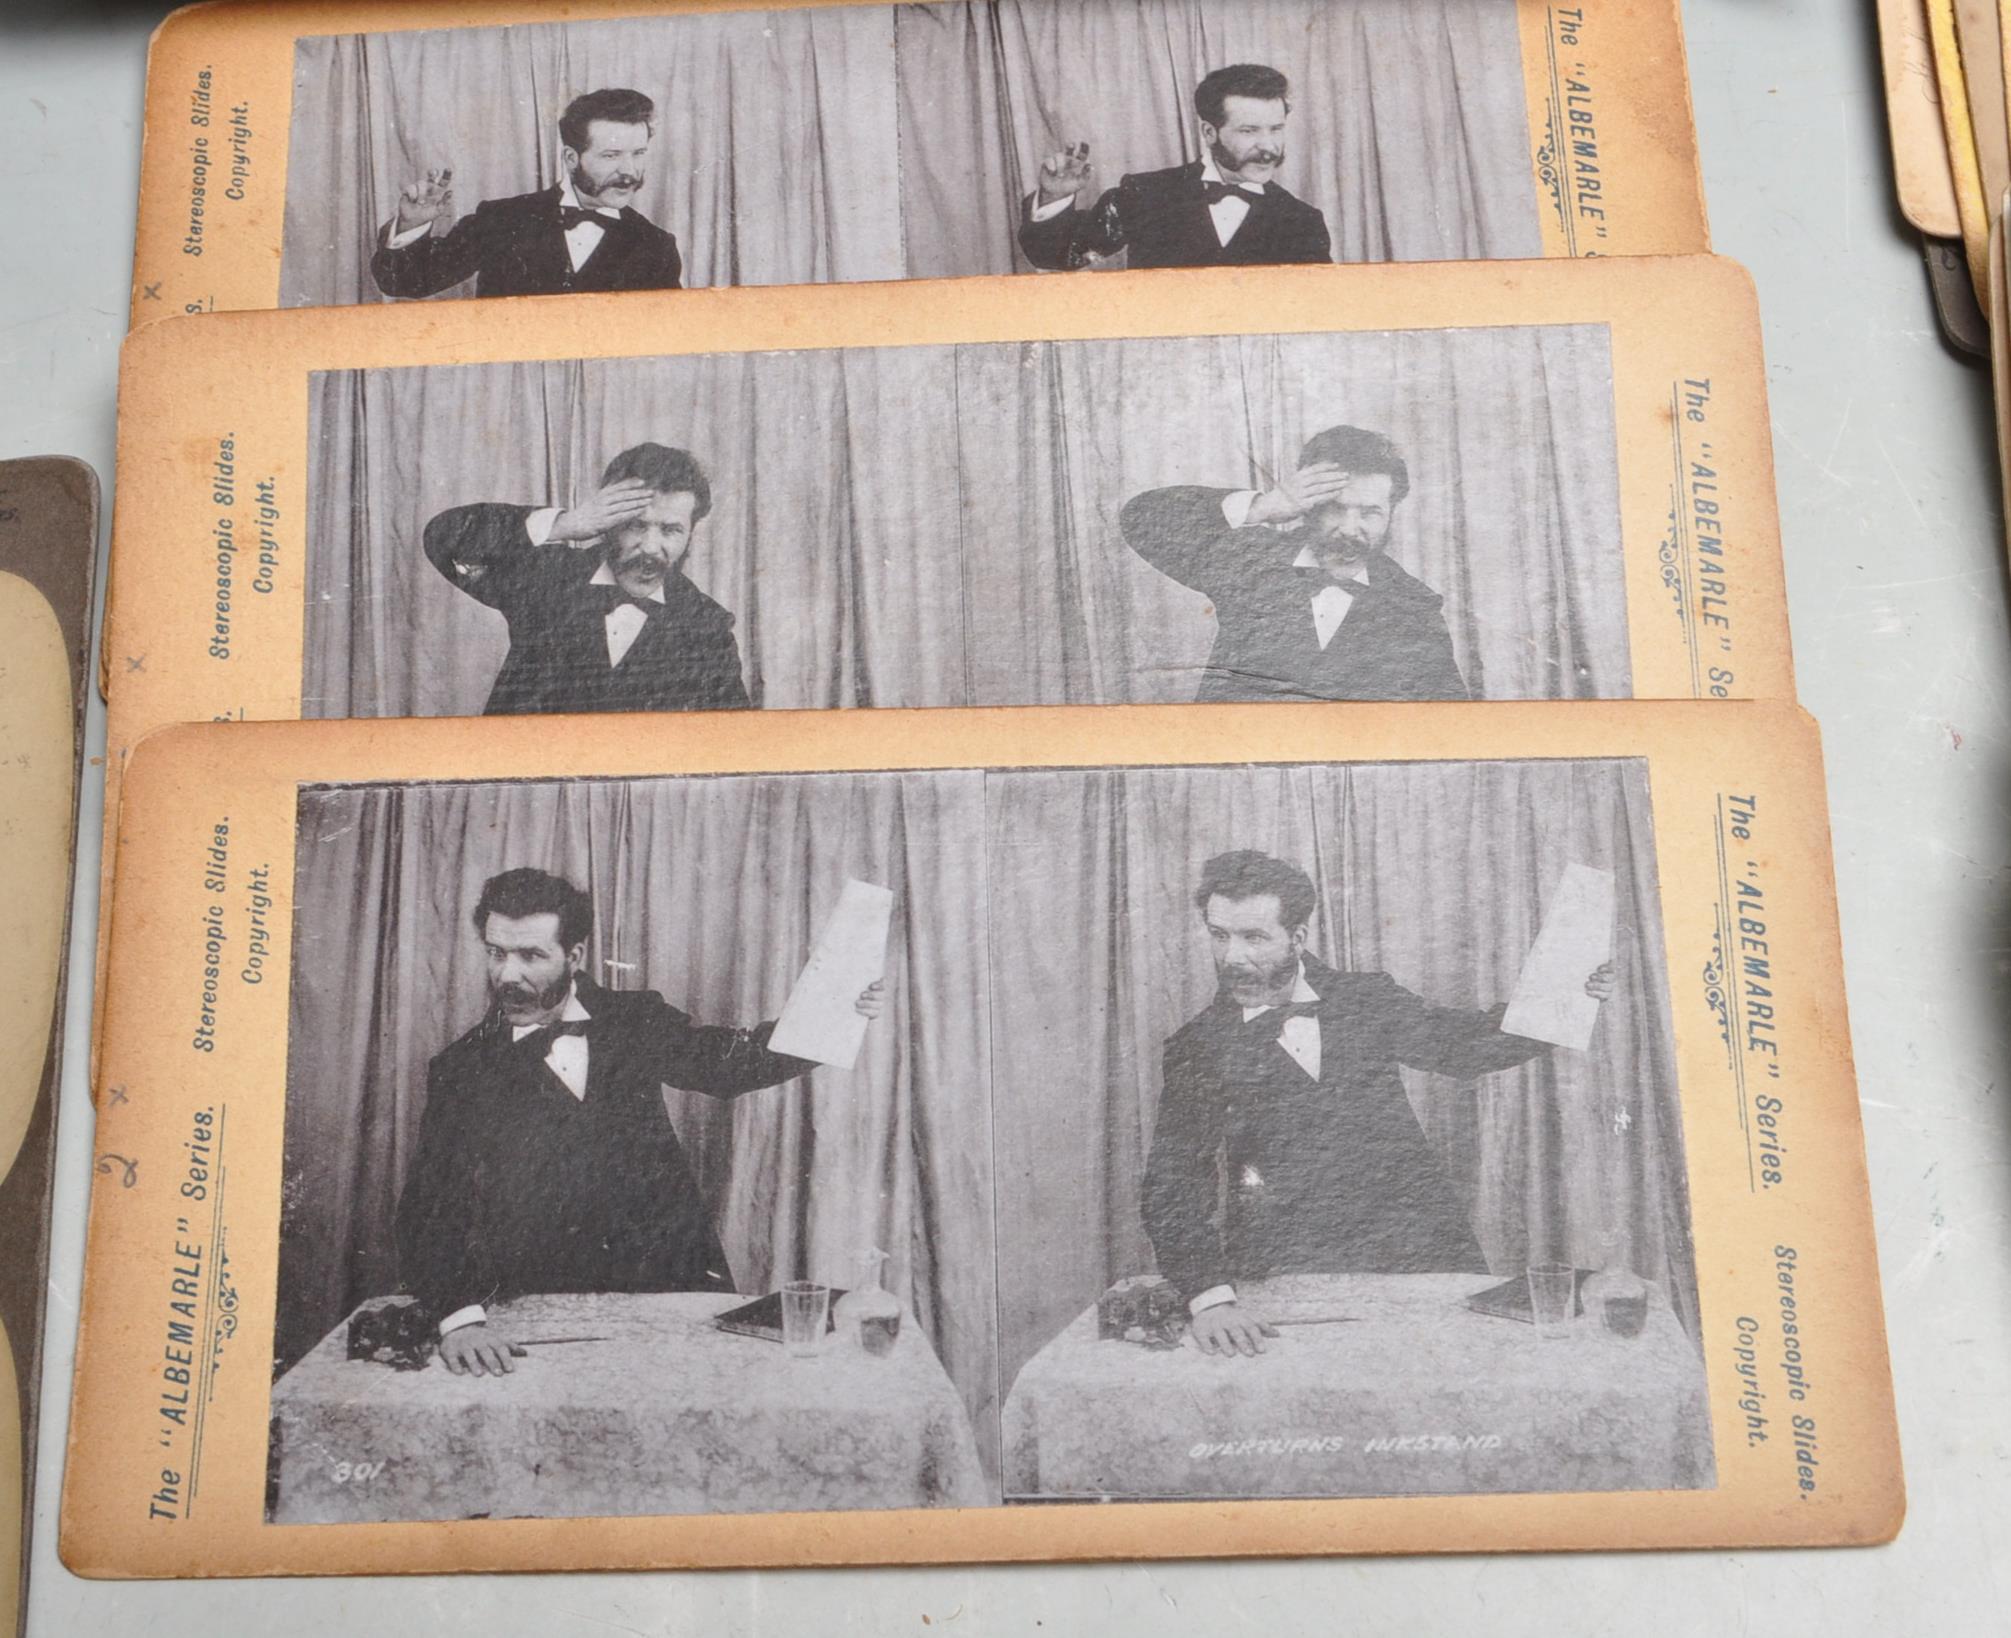 VICTORIAN / EDWARDIAN STEREOSCOPIC / STEREOSCOPE VIEWER & SLIDES - Image 10 of 11